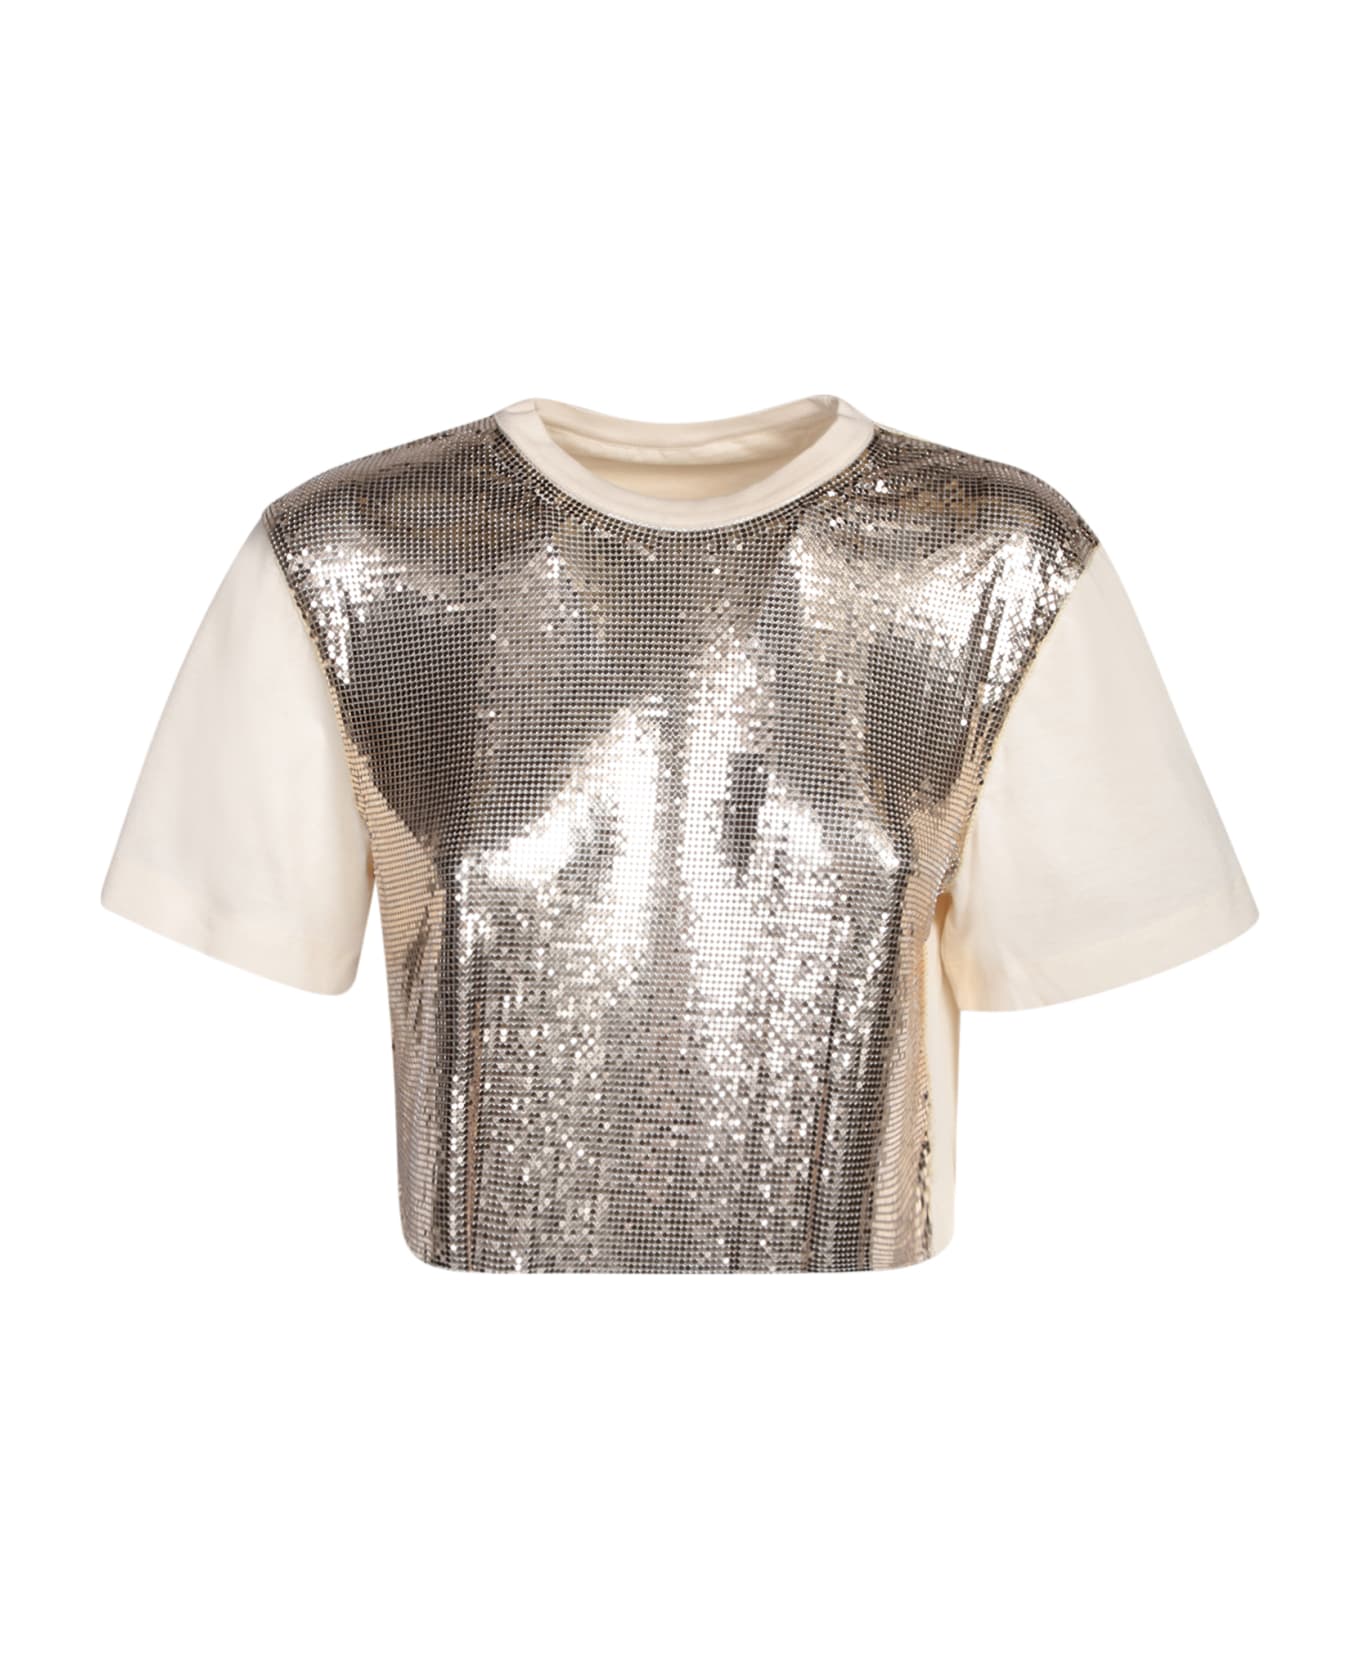 Paco Rabanne Nude Top In Shiny Mix-mesh - Pink トップス